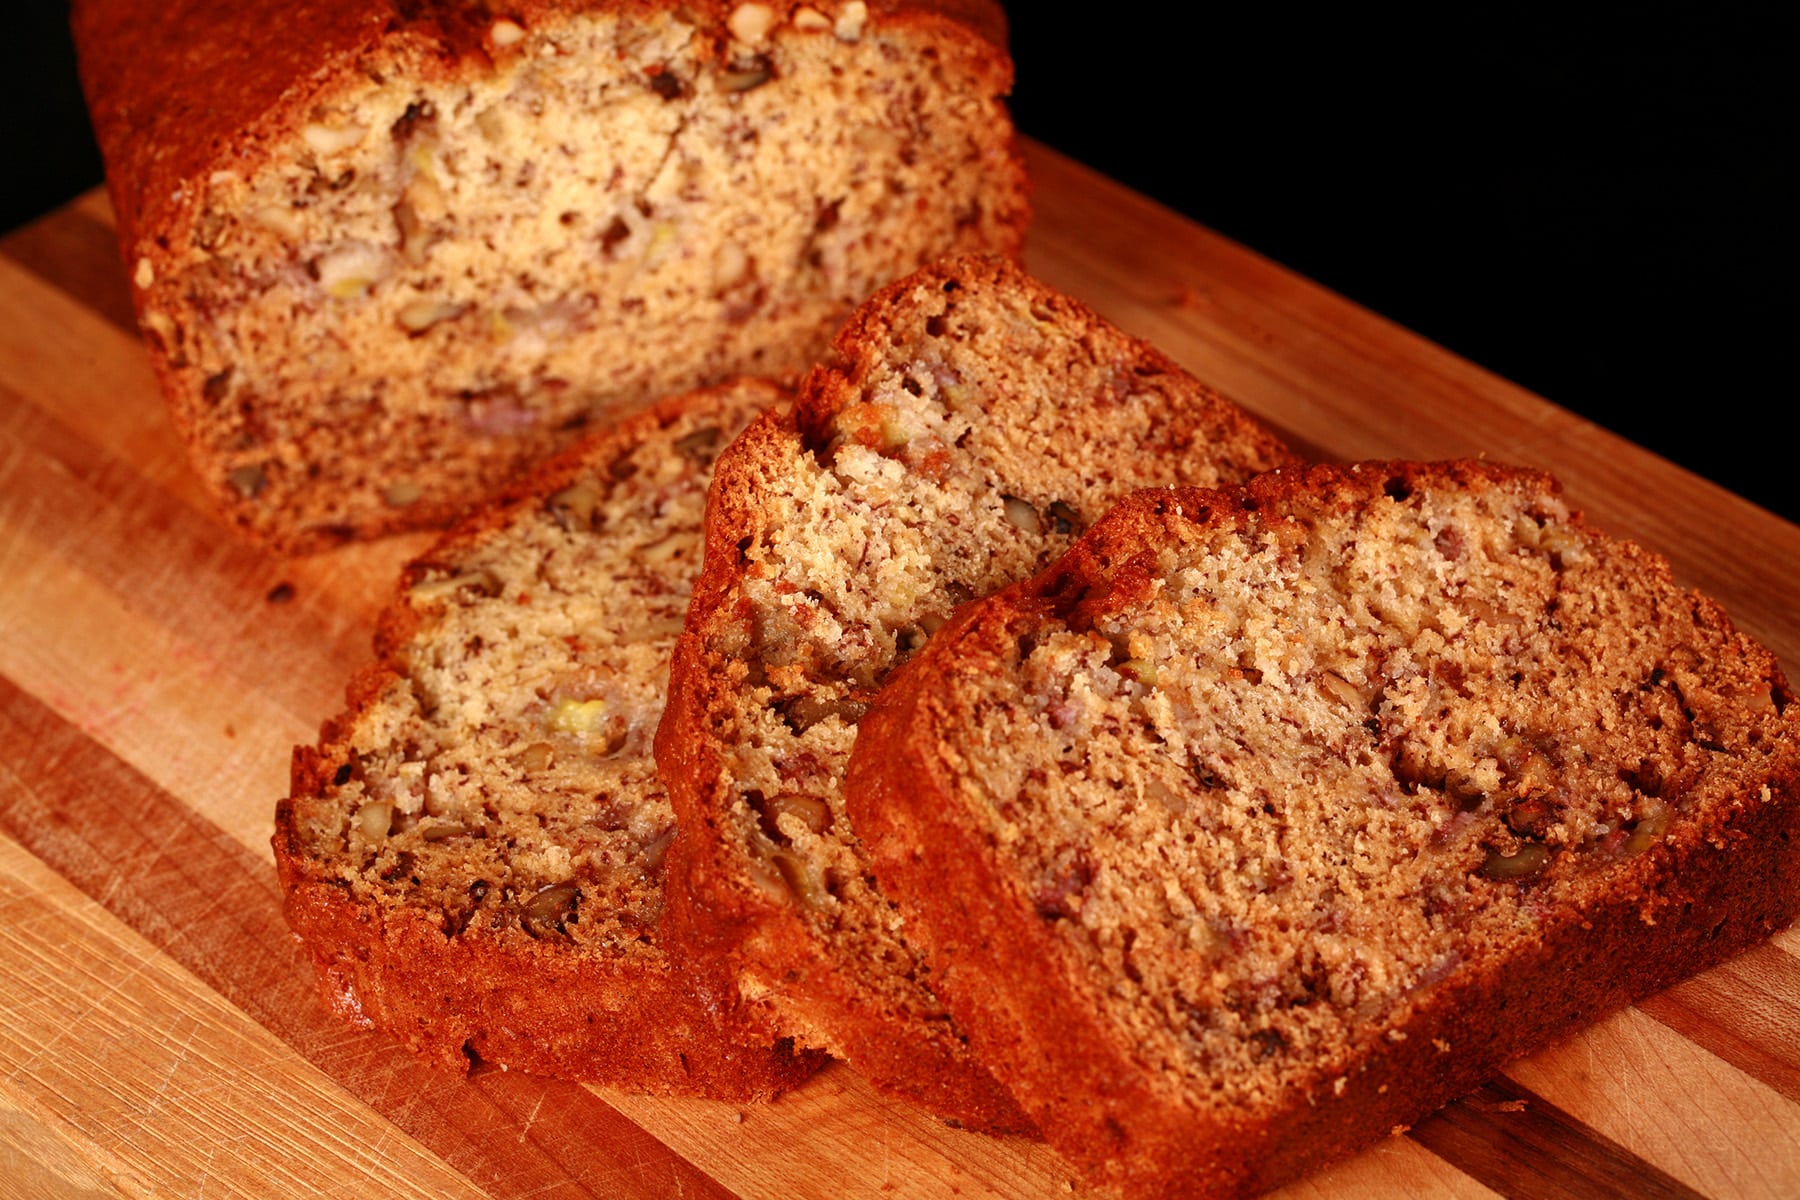 A sliced loaf of easy banana bread with walnuts, on a wooden cutting board.